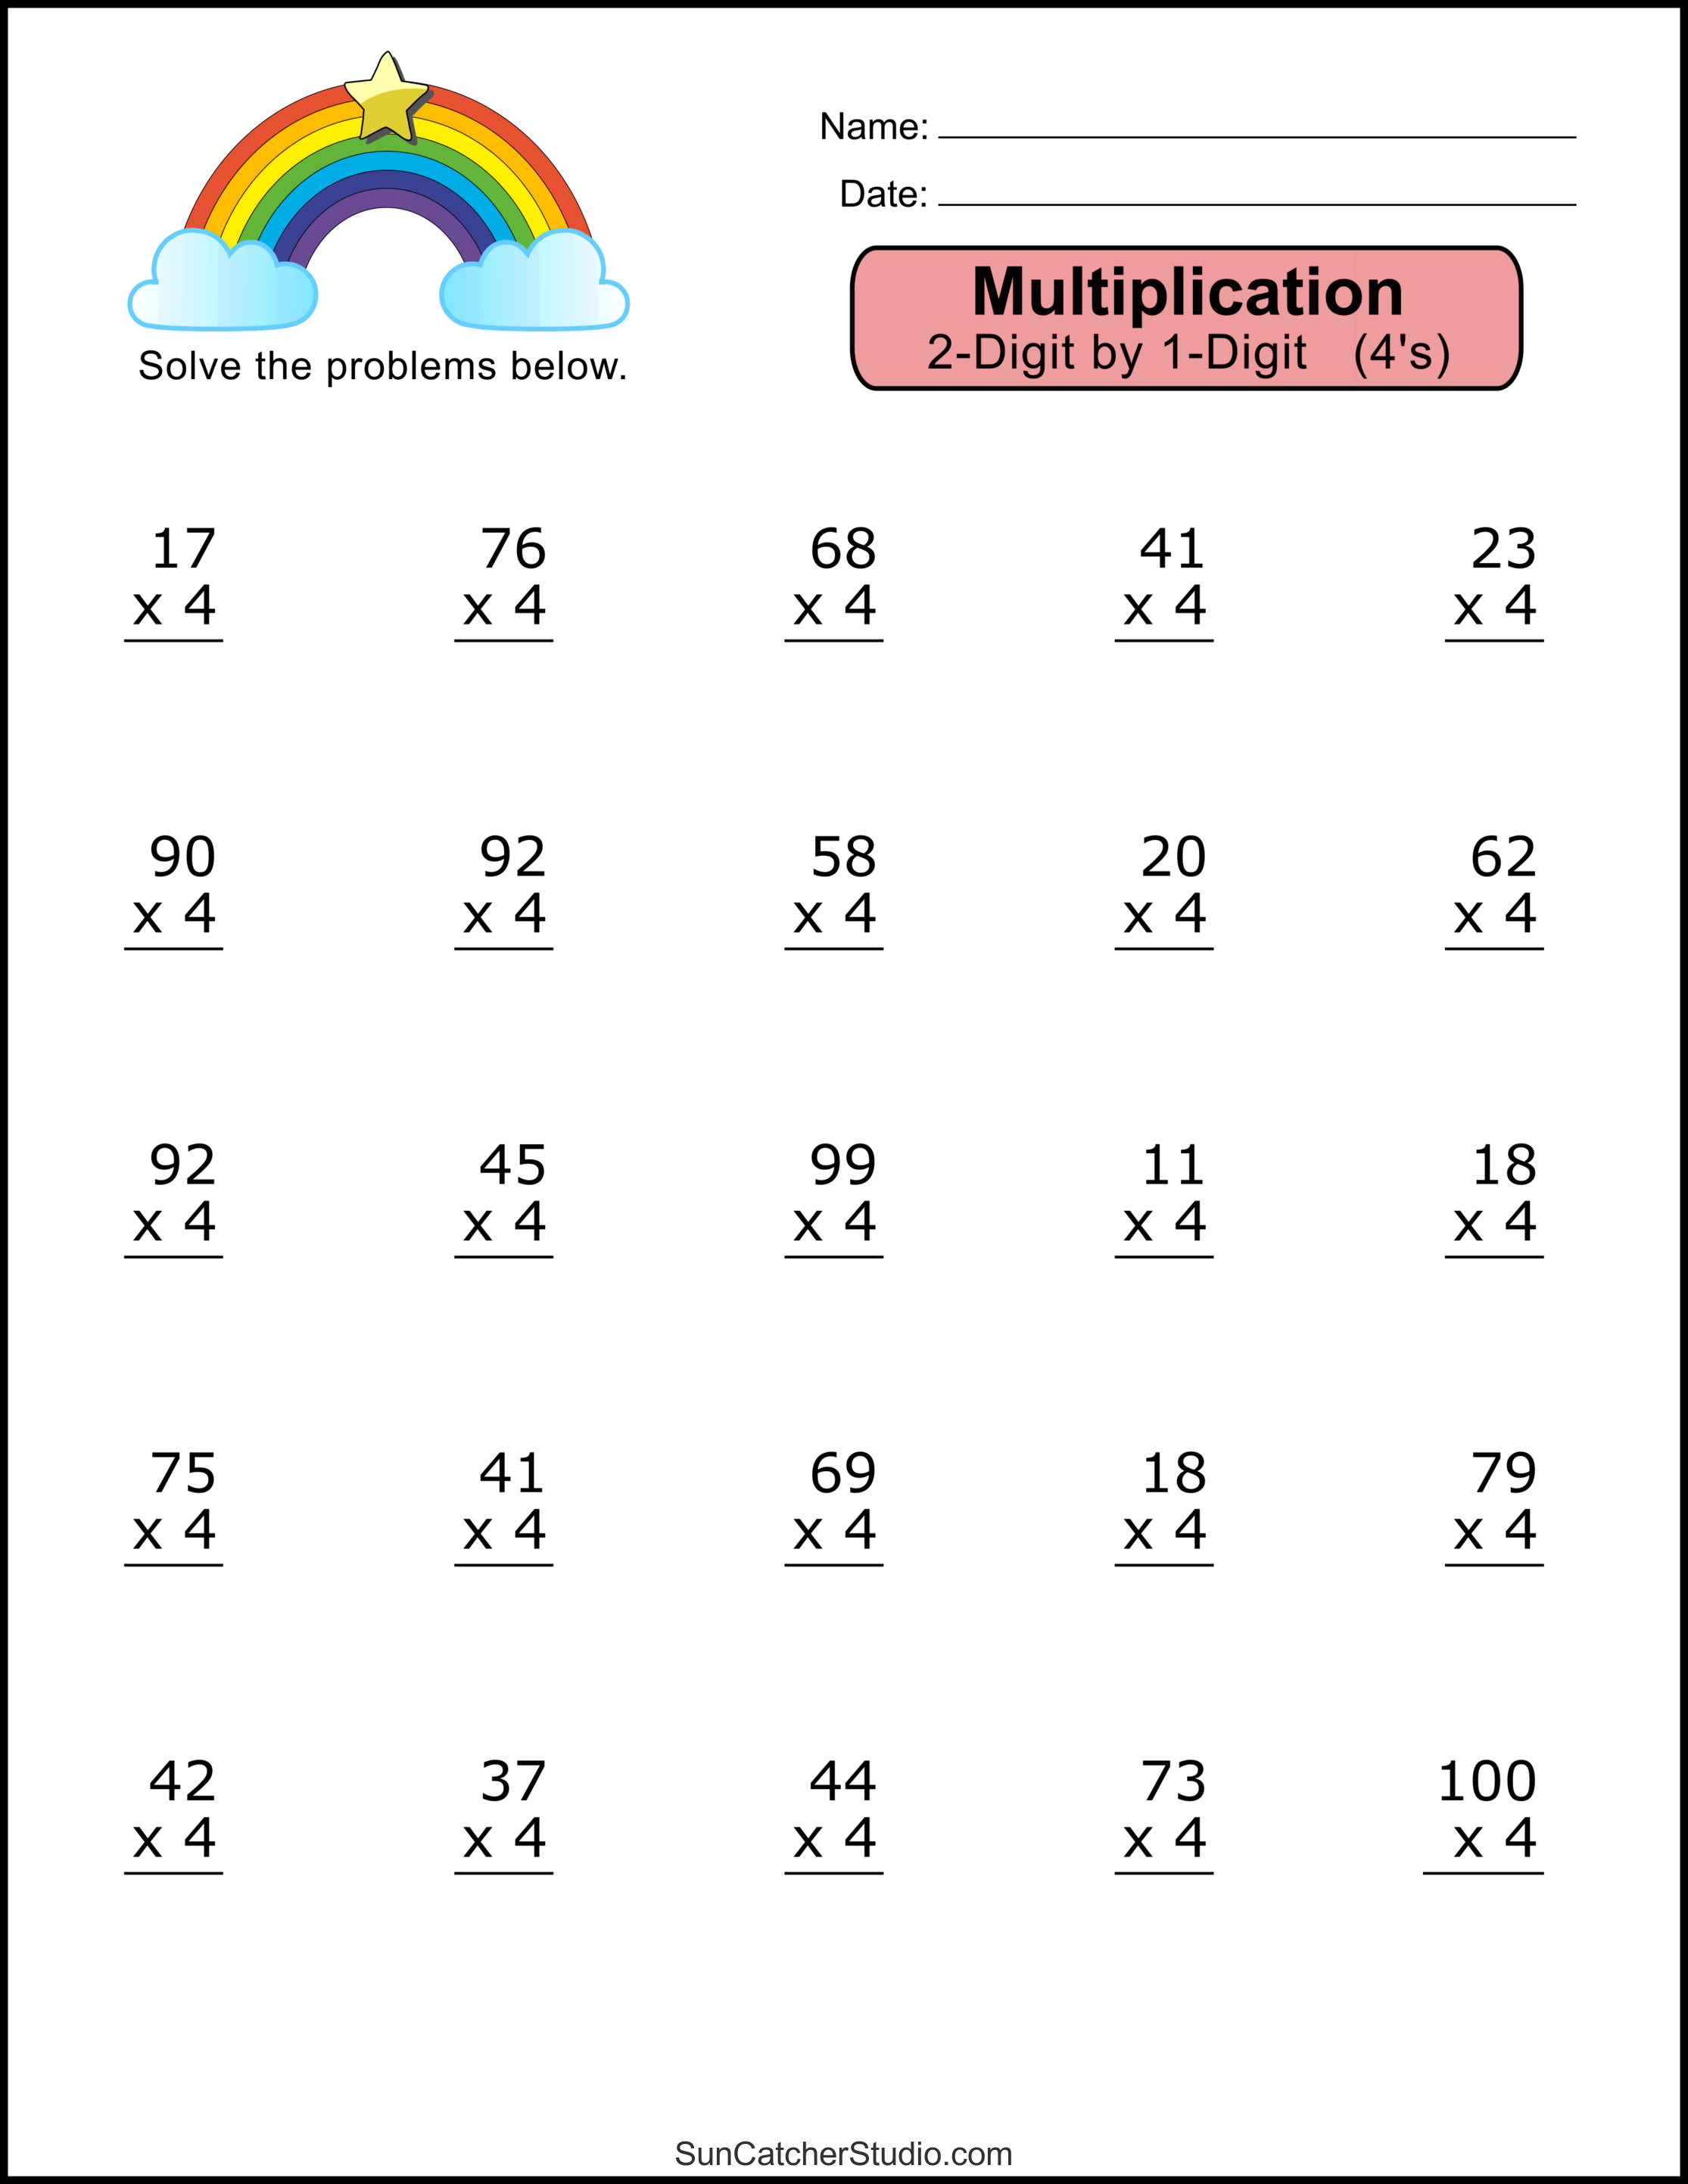 multiplication-worksheets-2-digit-by-1-digit-math-drills-diy-projects-patterns-monograms